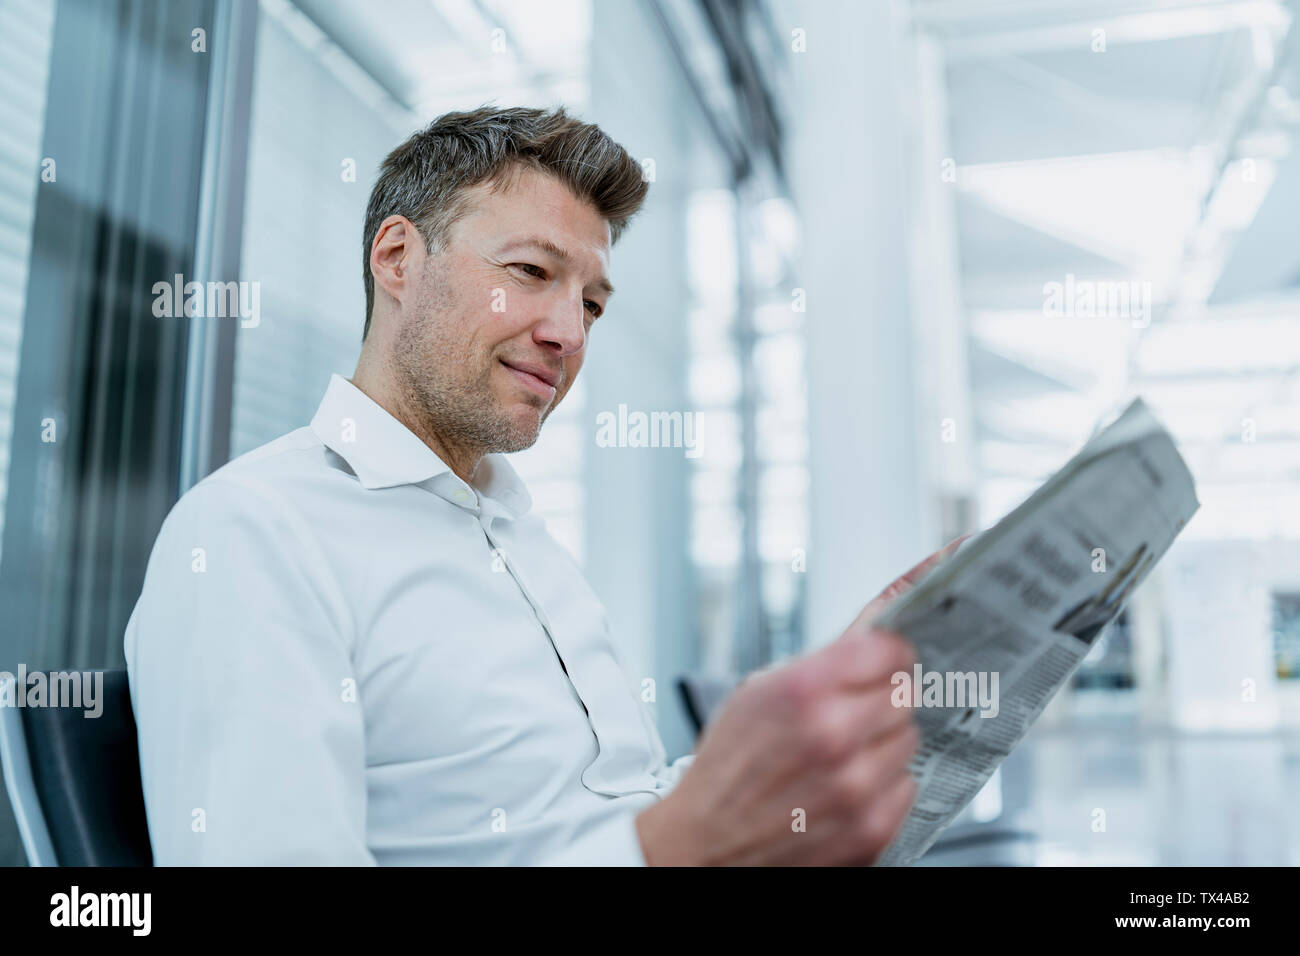 Businessman sitting in waiting area reading newspaper Stock Photo